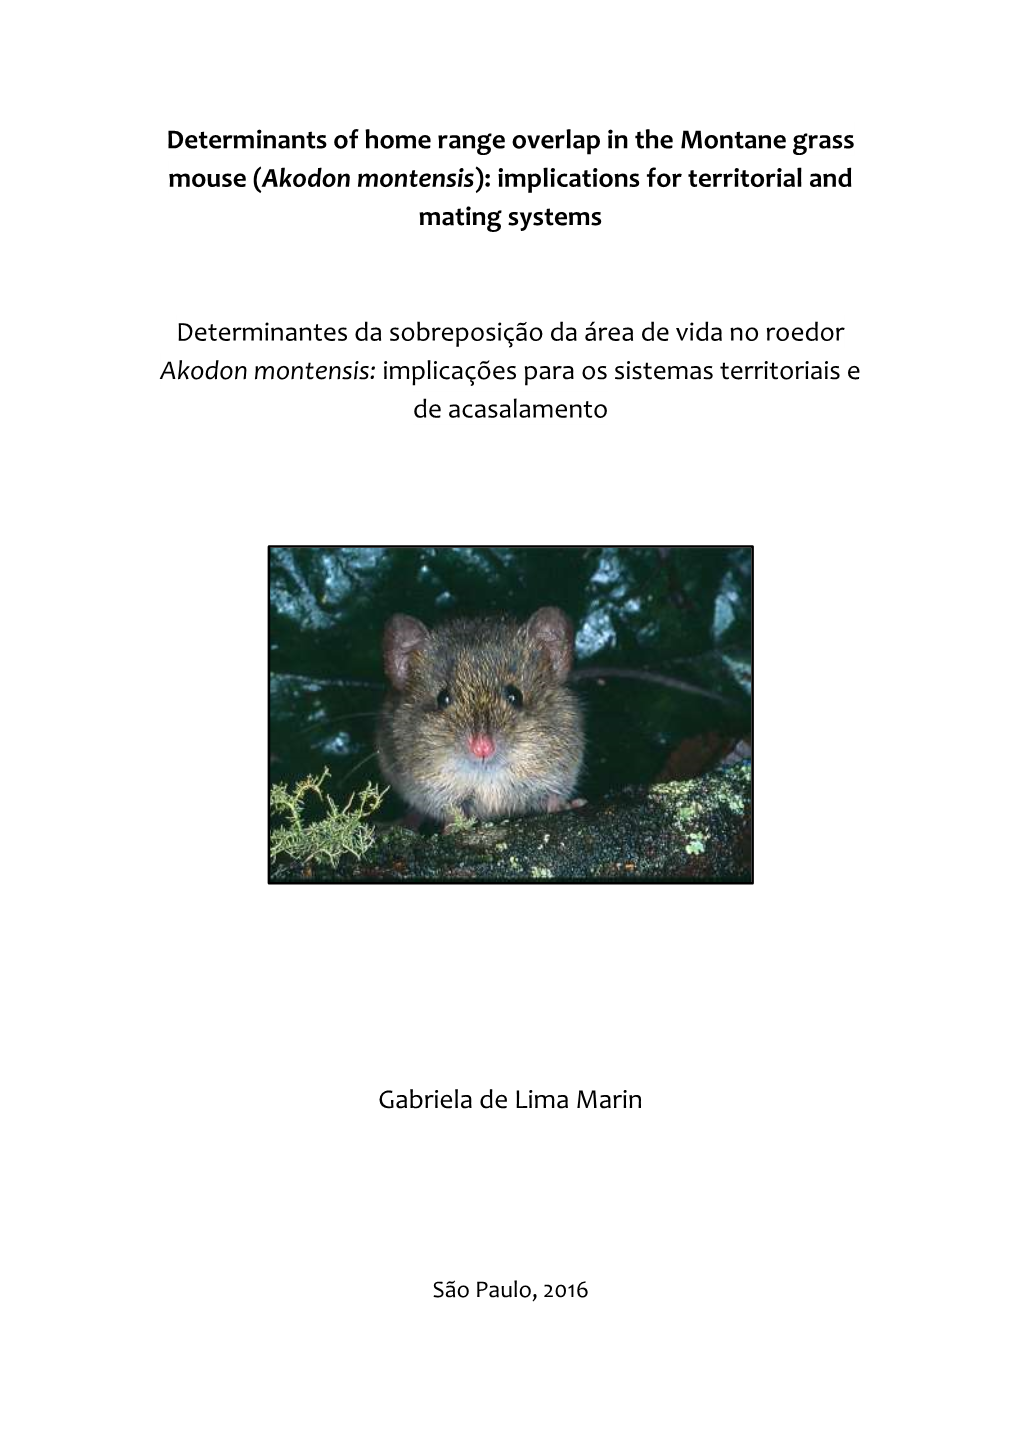 Determinants of Home Range Overlap in the Montane Grass Mouse (Akodon Montensis): Implications for Territorial and Mating Systems